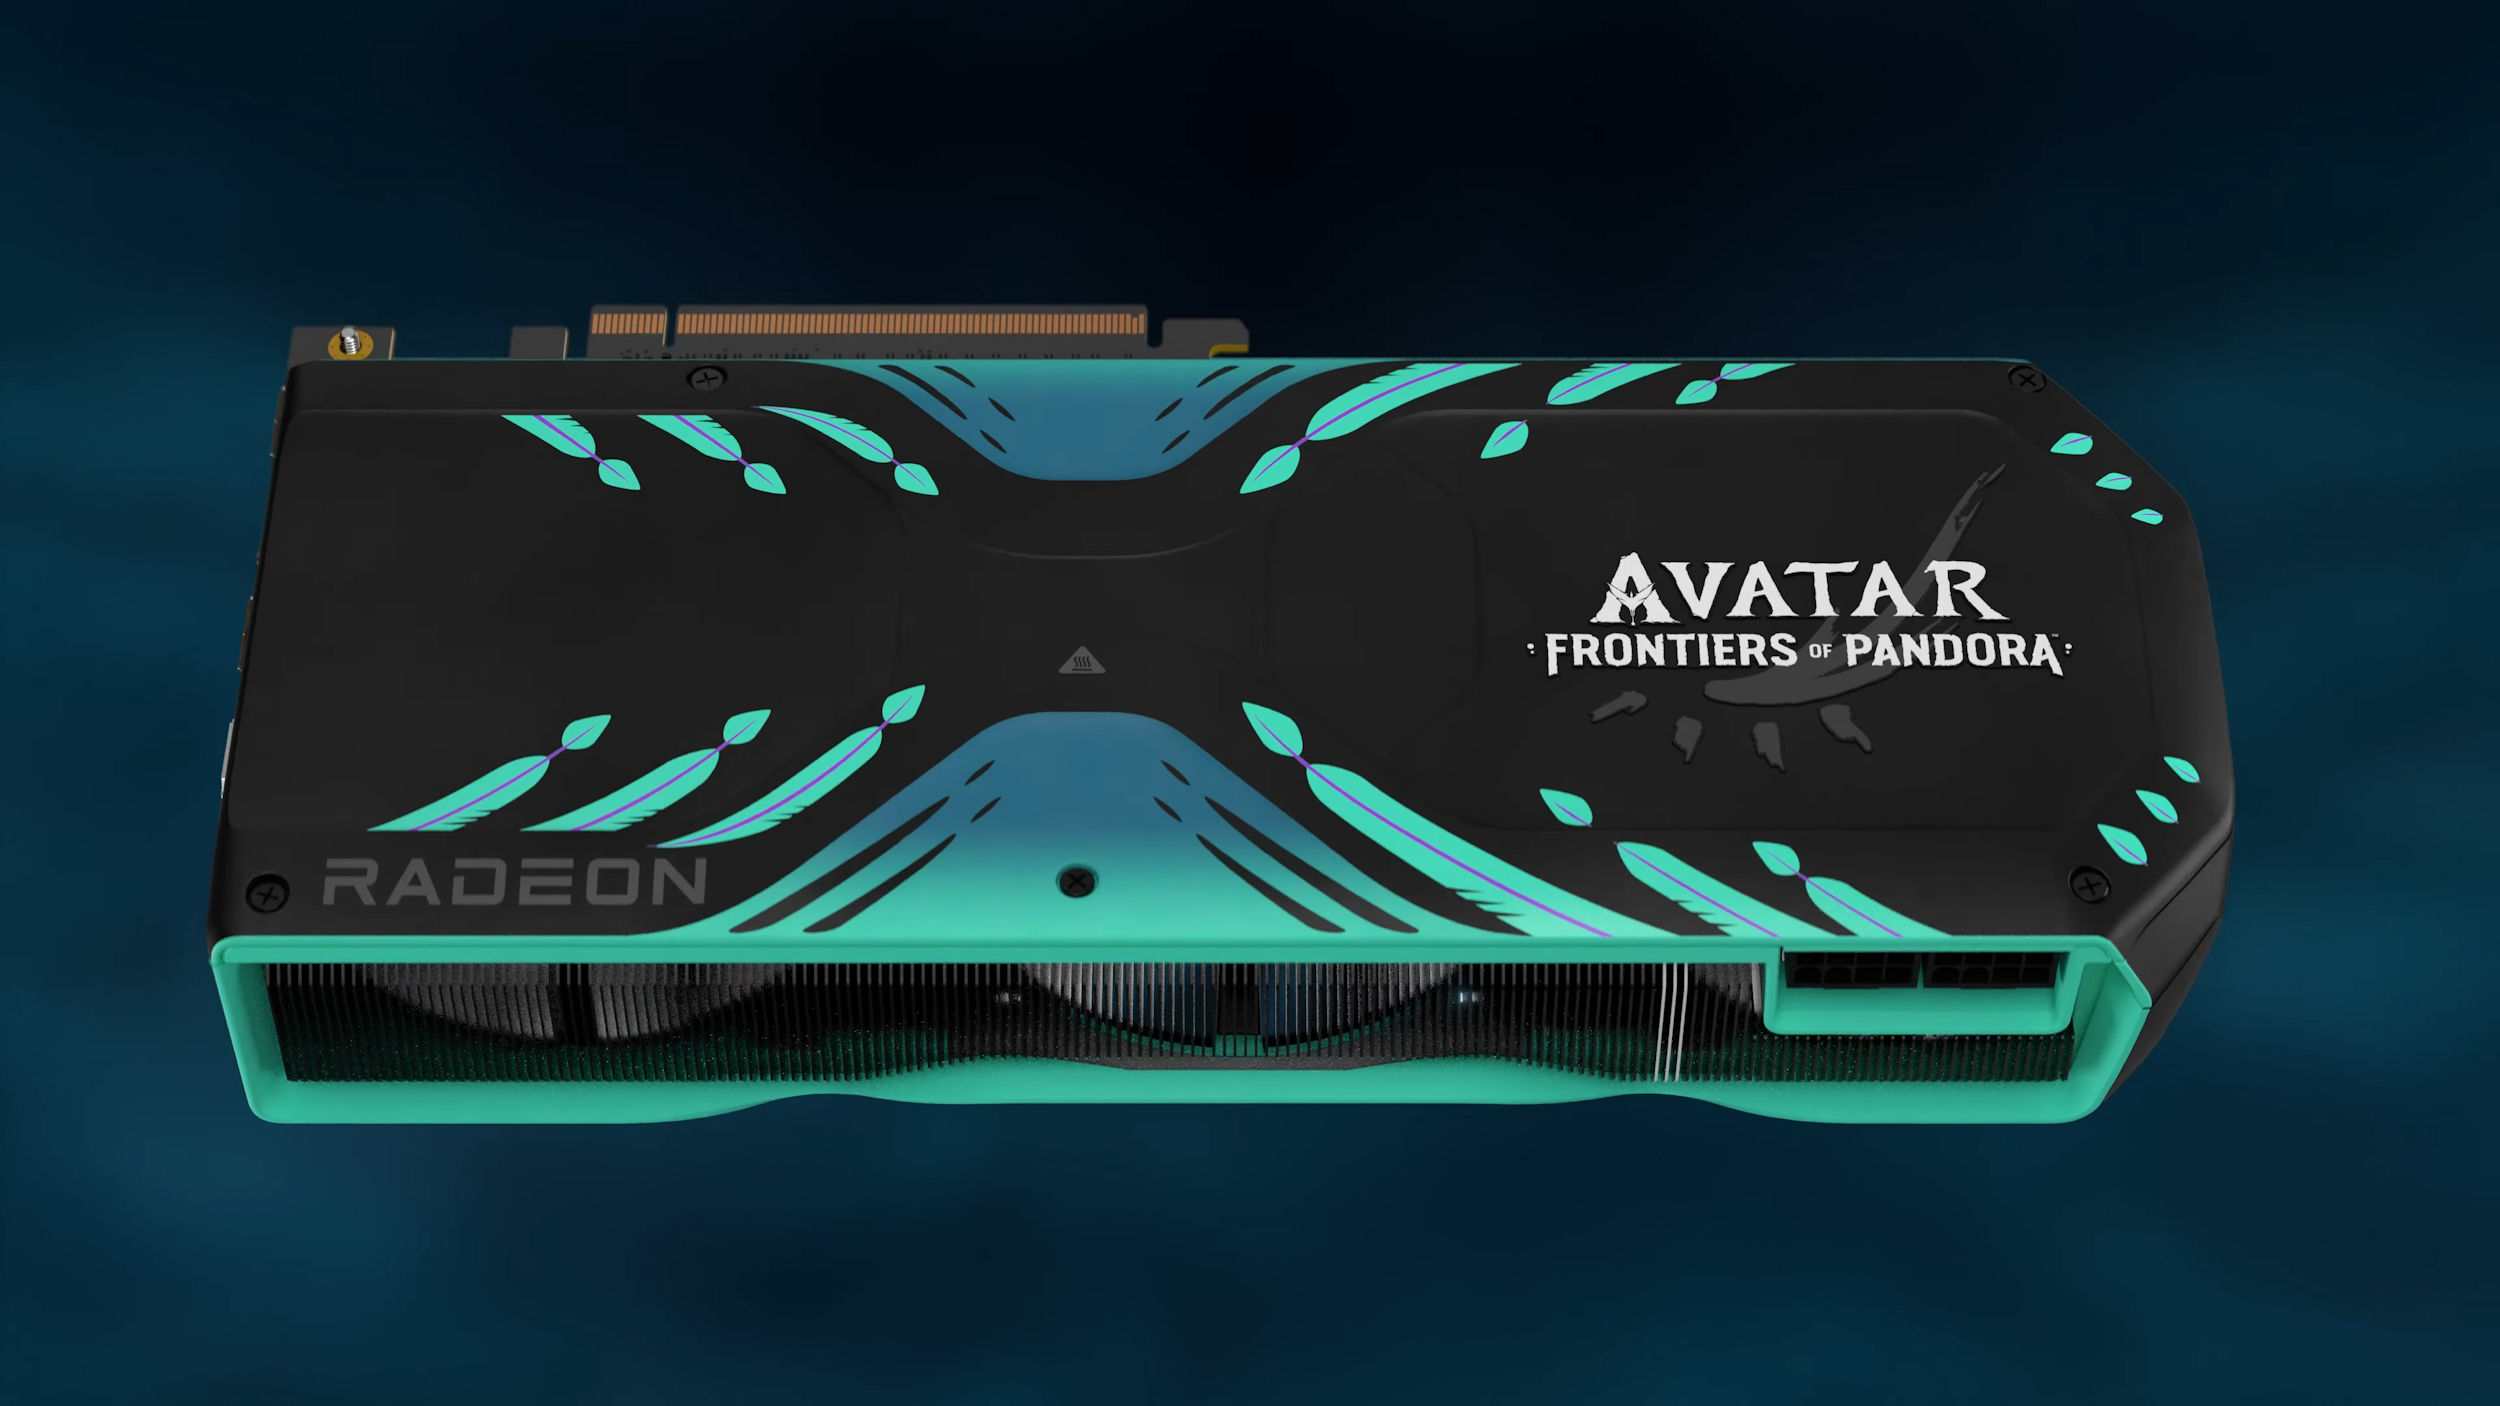  Avatar: Frontiers of Pandora - Limited Edition